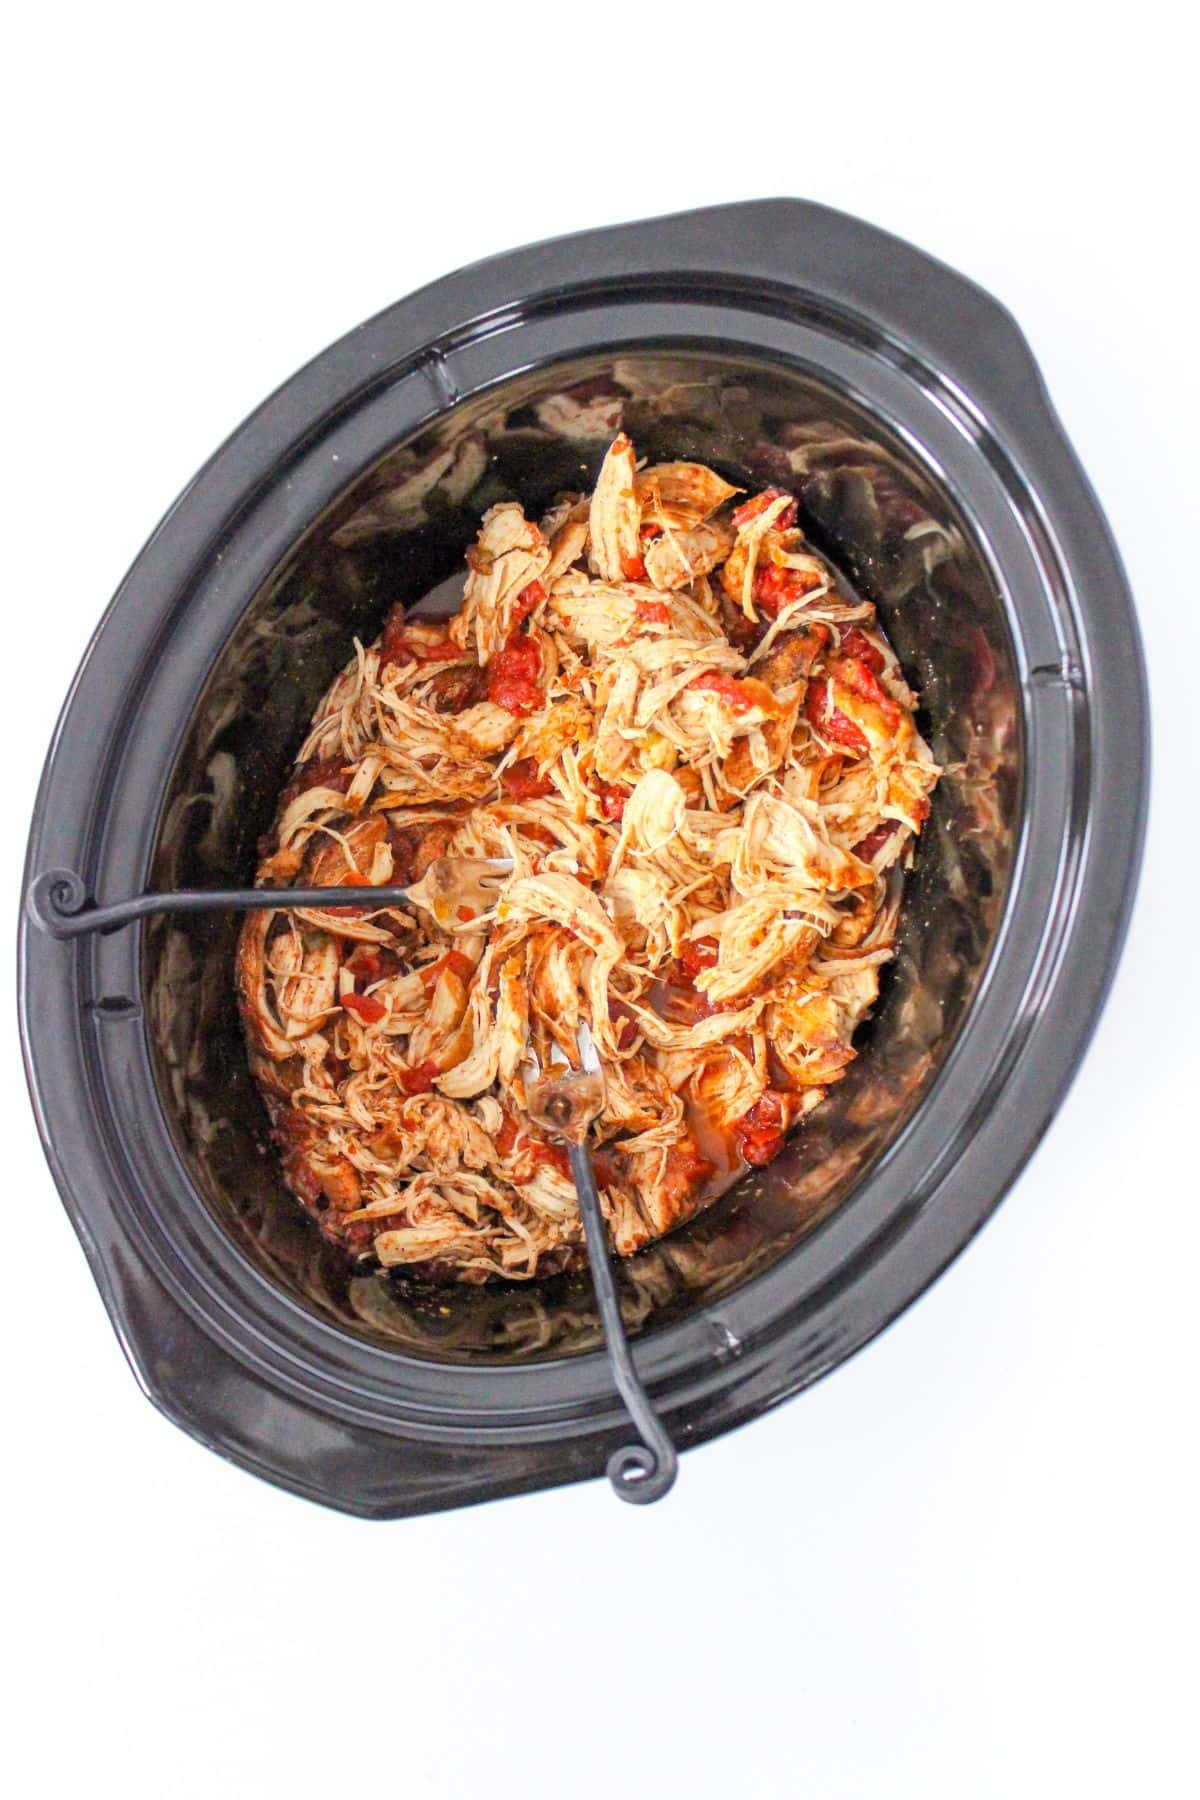 Mexican shredded chicken with diced tomatoes in a Crockpot insert with two forks